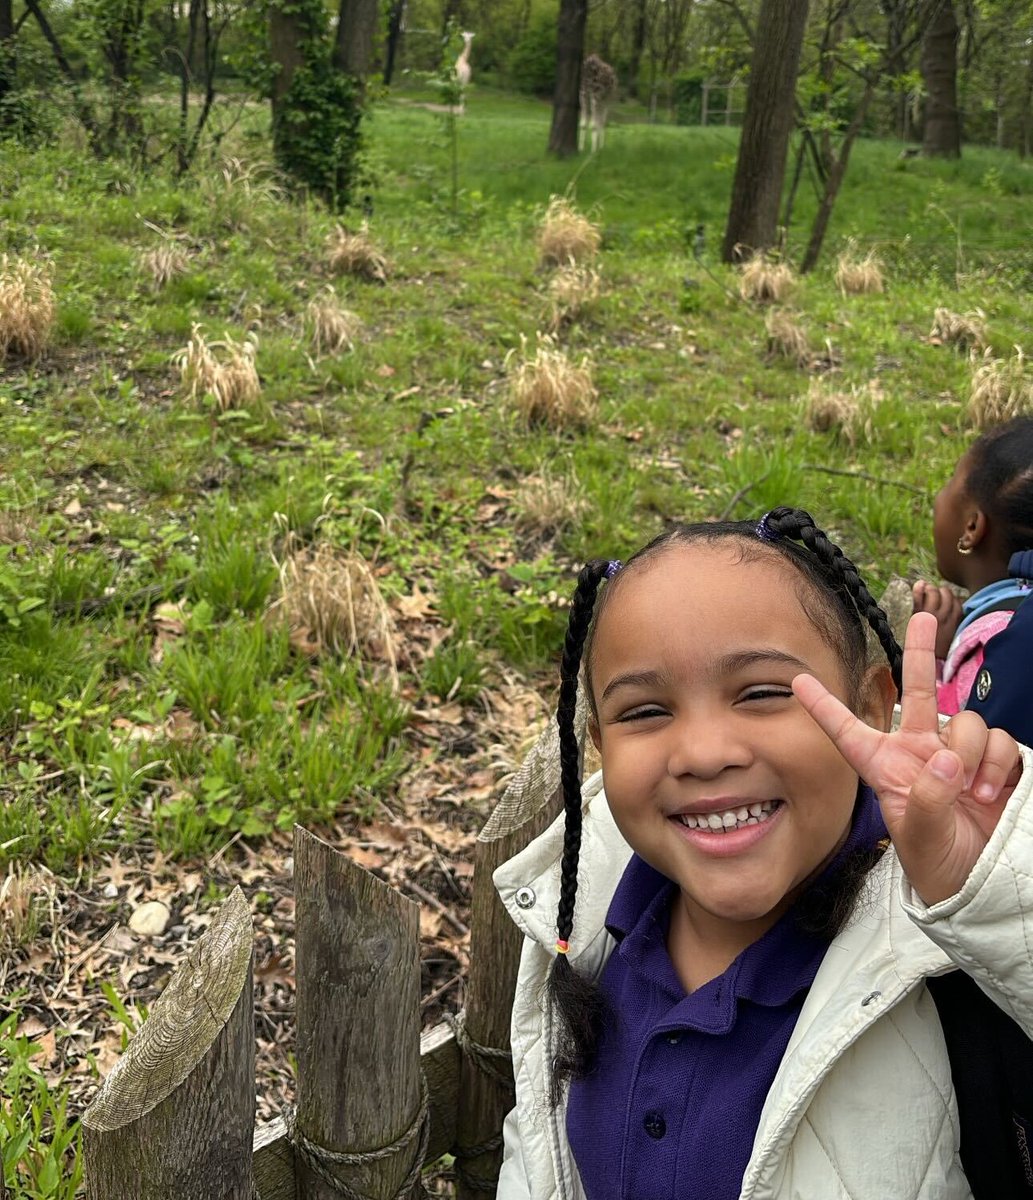 Pre-K adventures at Zeta are always the best! Our most recent field trip took our Pre-K'ers to the @BronxZoo! It's not too late to apply - come join in on our Zeta adventures!

#zetaschools #zetacharterschools #nyceducation #charterschools #bronxcharterschool #inwoodcharterschool